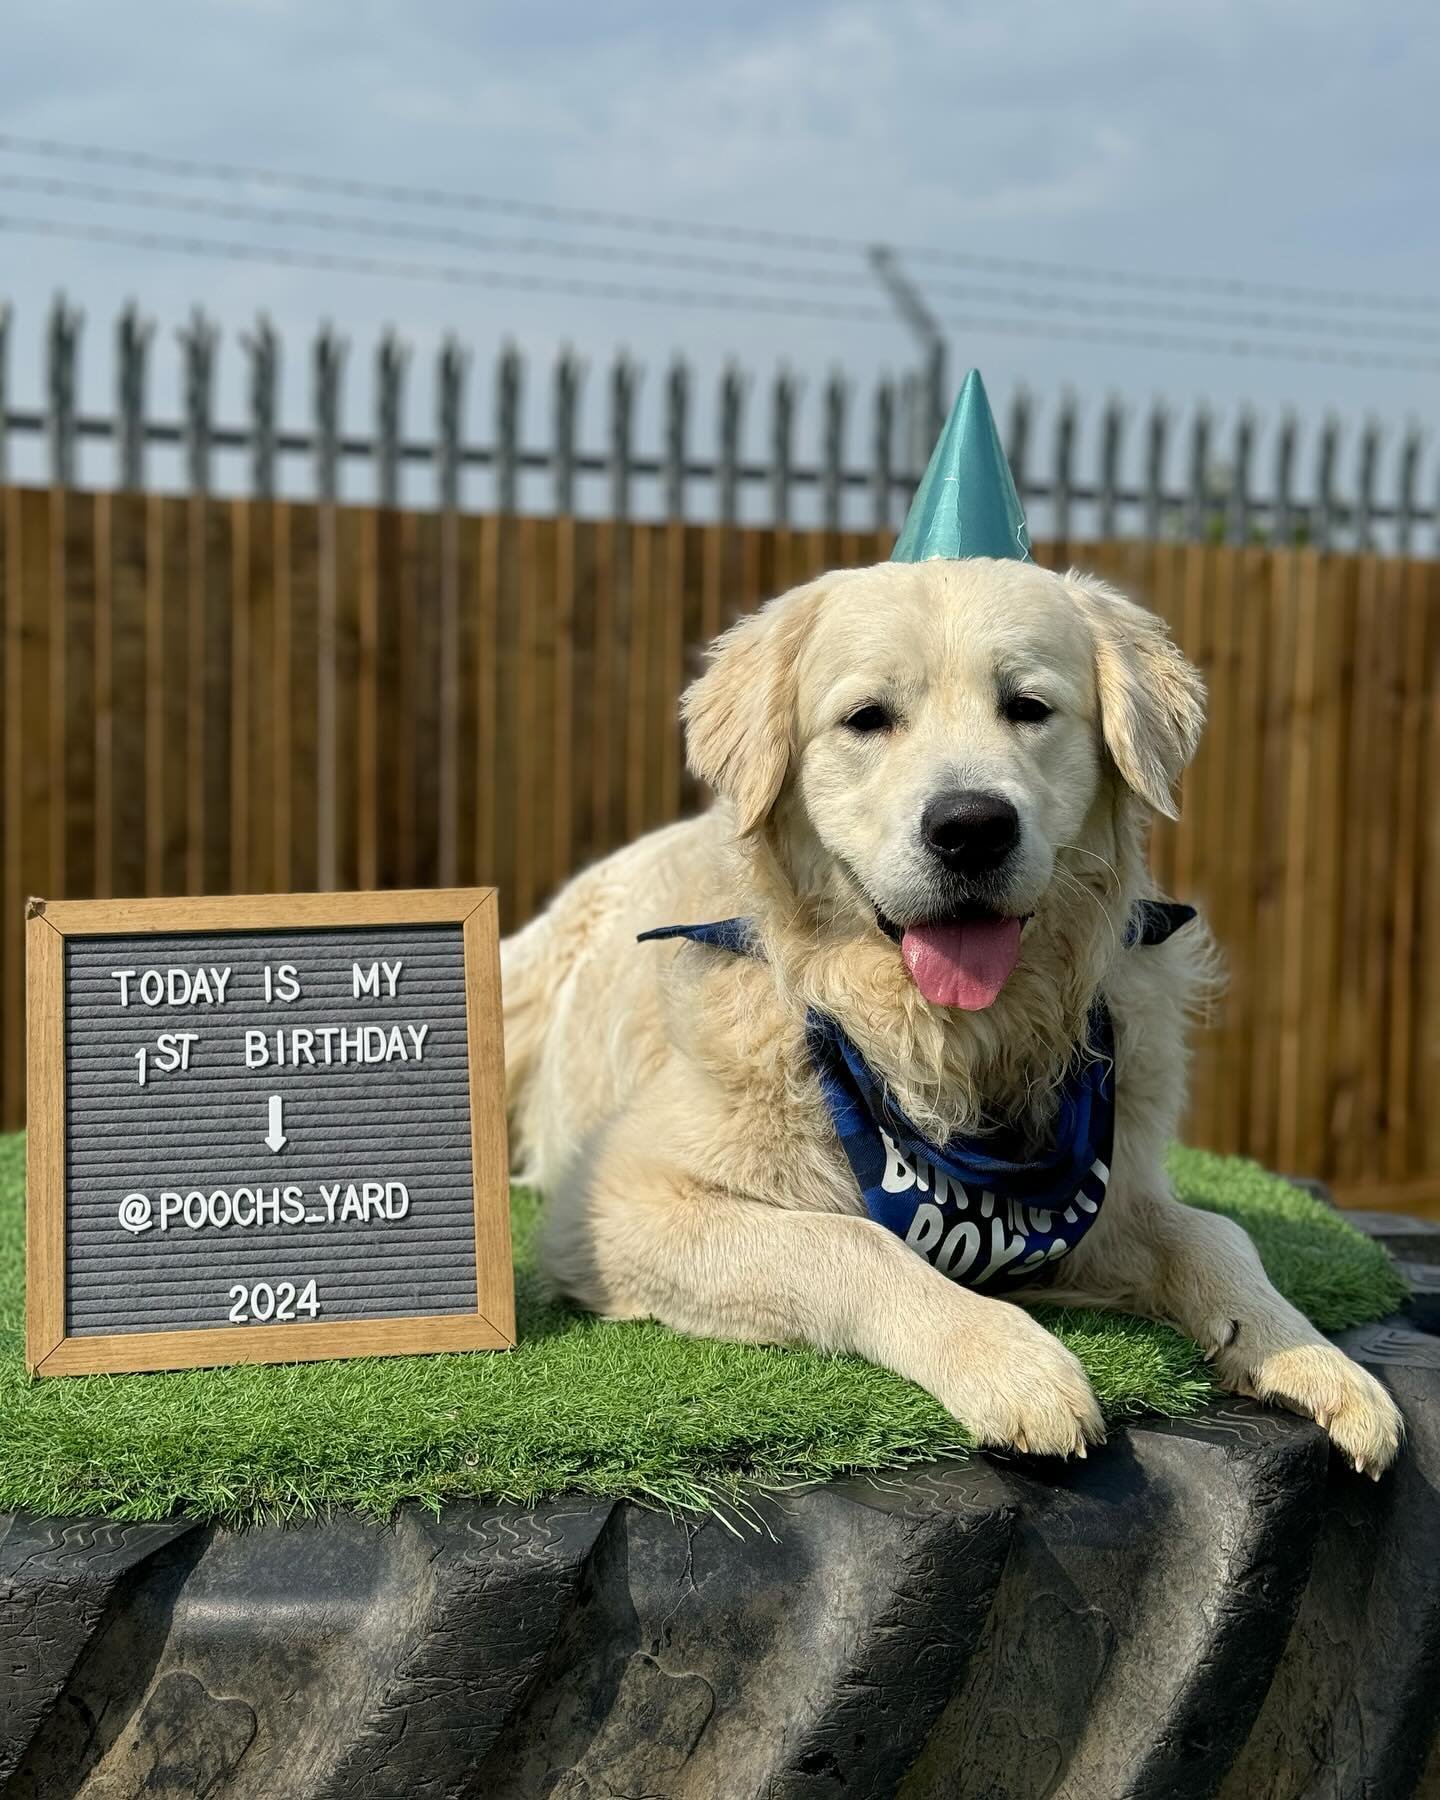 We have two birthdays in the house today!!
&mdash;
Firstly it&rsquo;s Bruce&rsquo;s 1st birthday!! 🎈 Bruce is a very funny character and always runs around with a beautiful smile on his face. He&rsquo;s more than happy and willing to do pretty much 